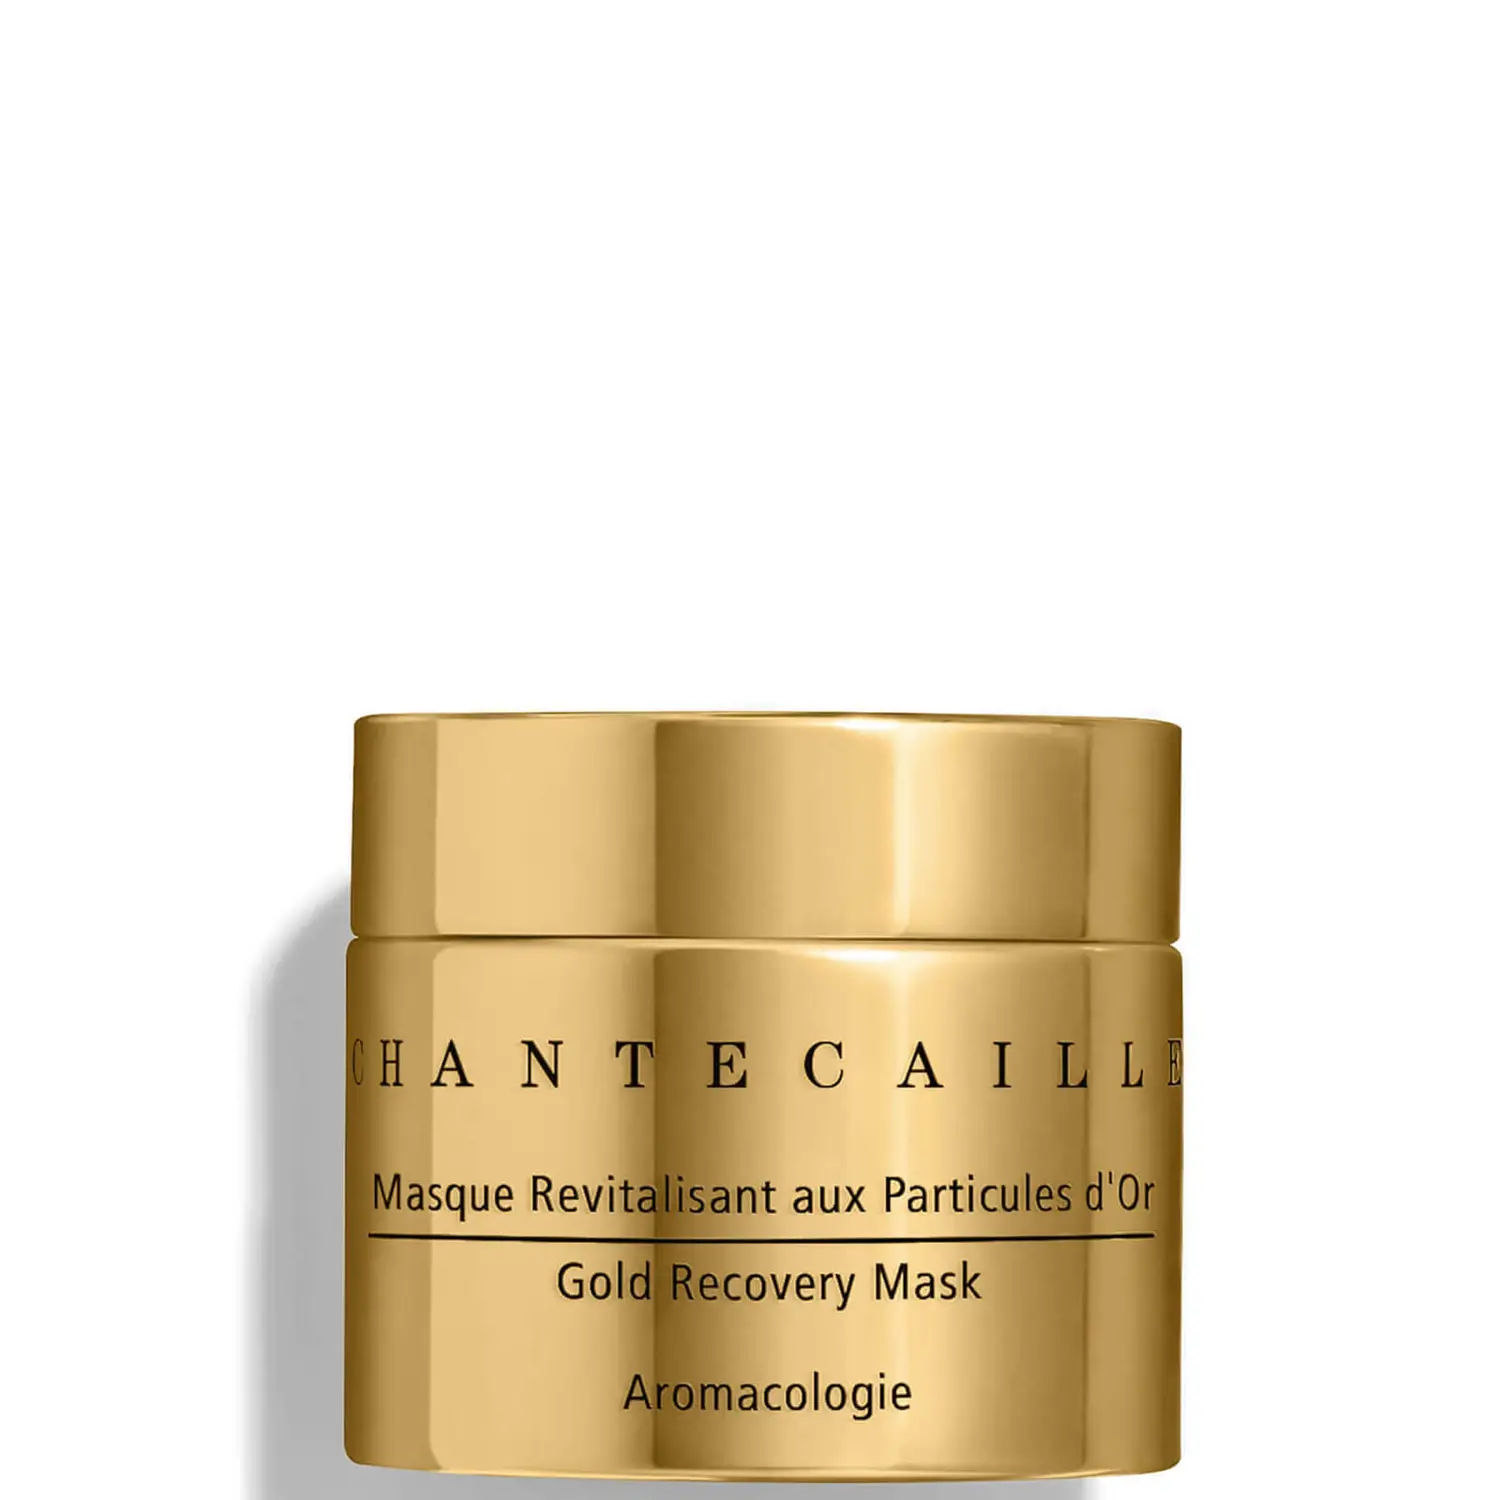 Gold Recovery Mask, Chantecaille